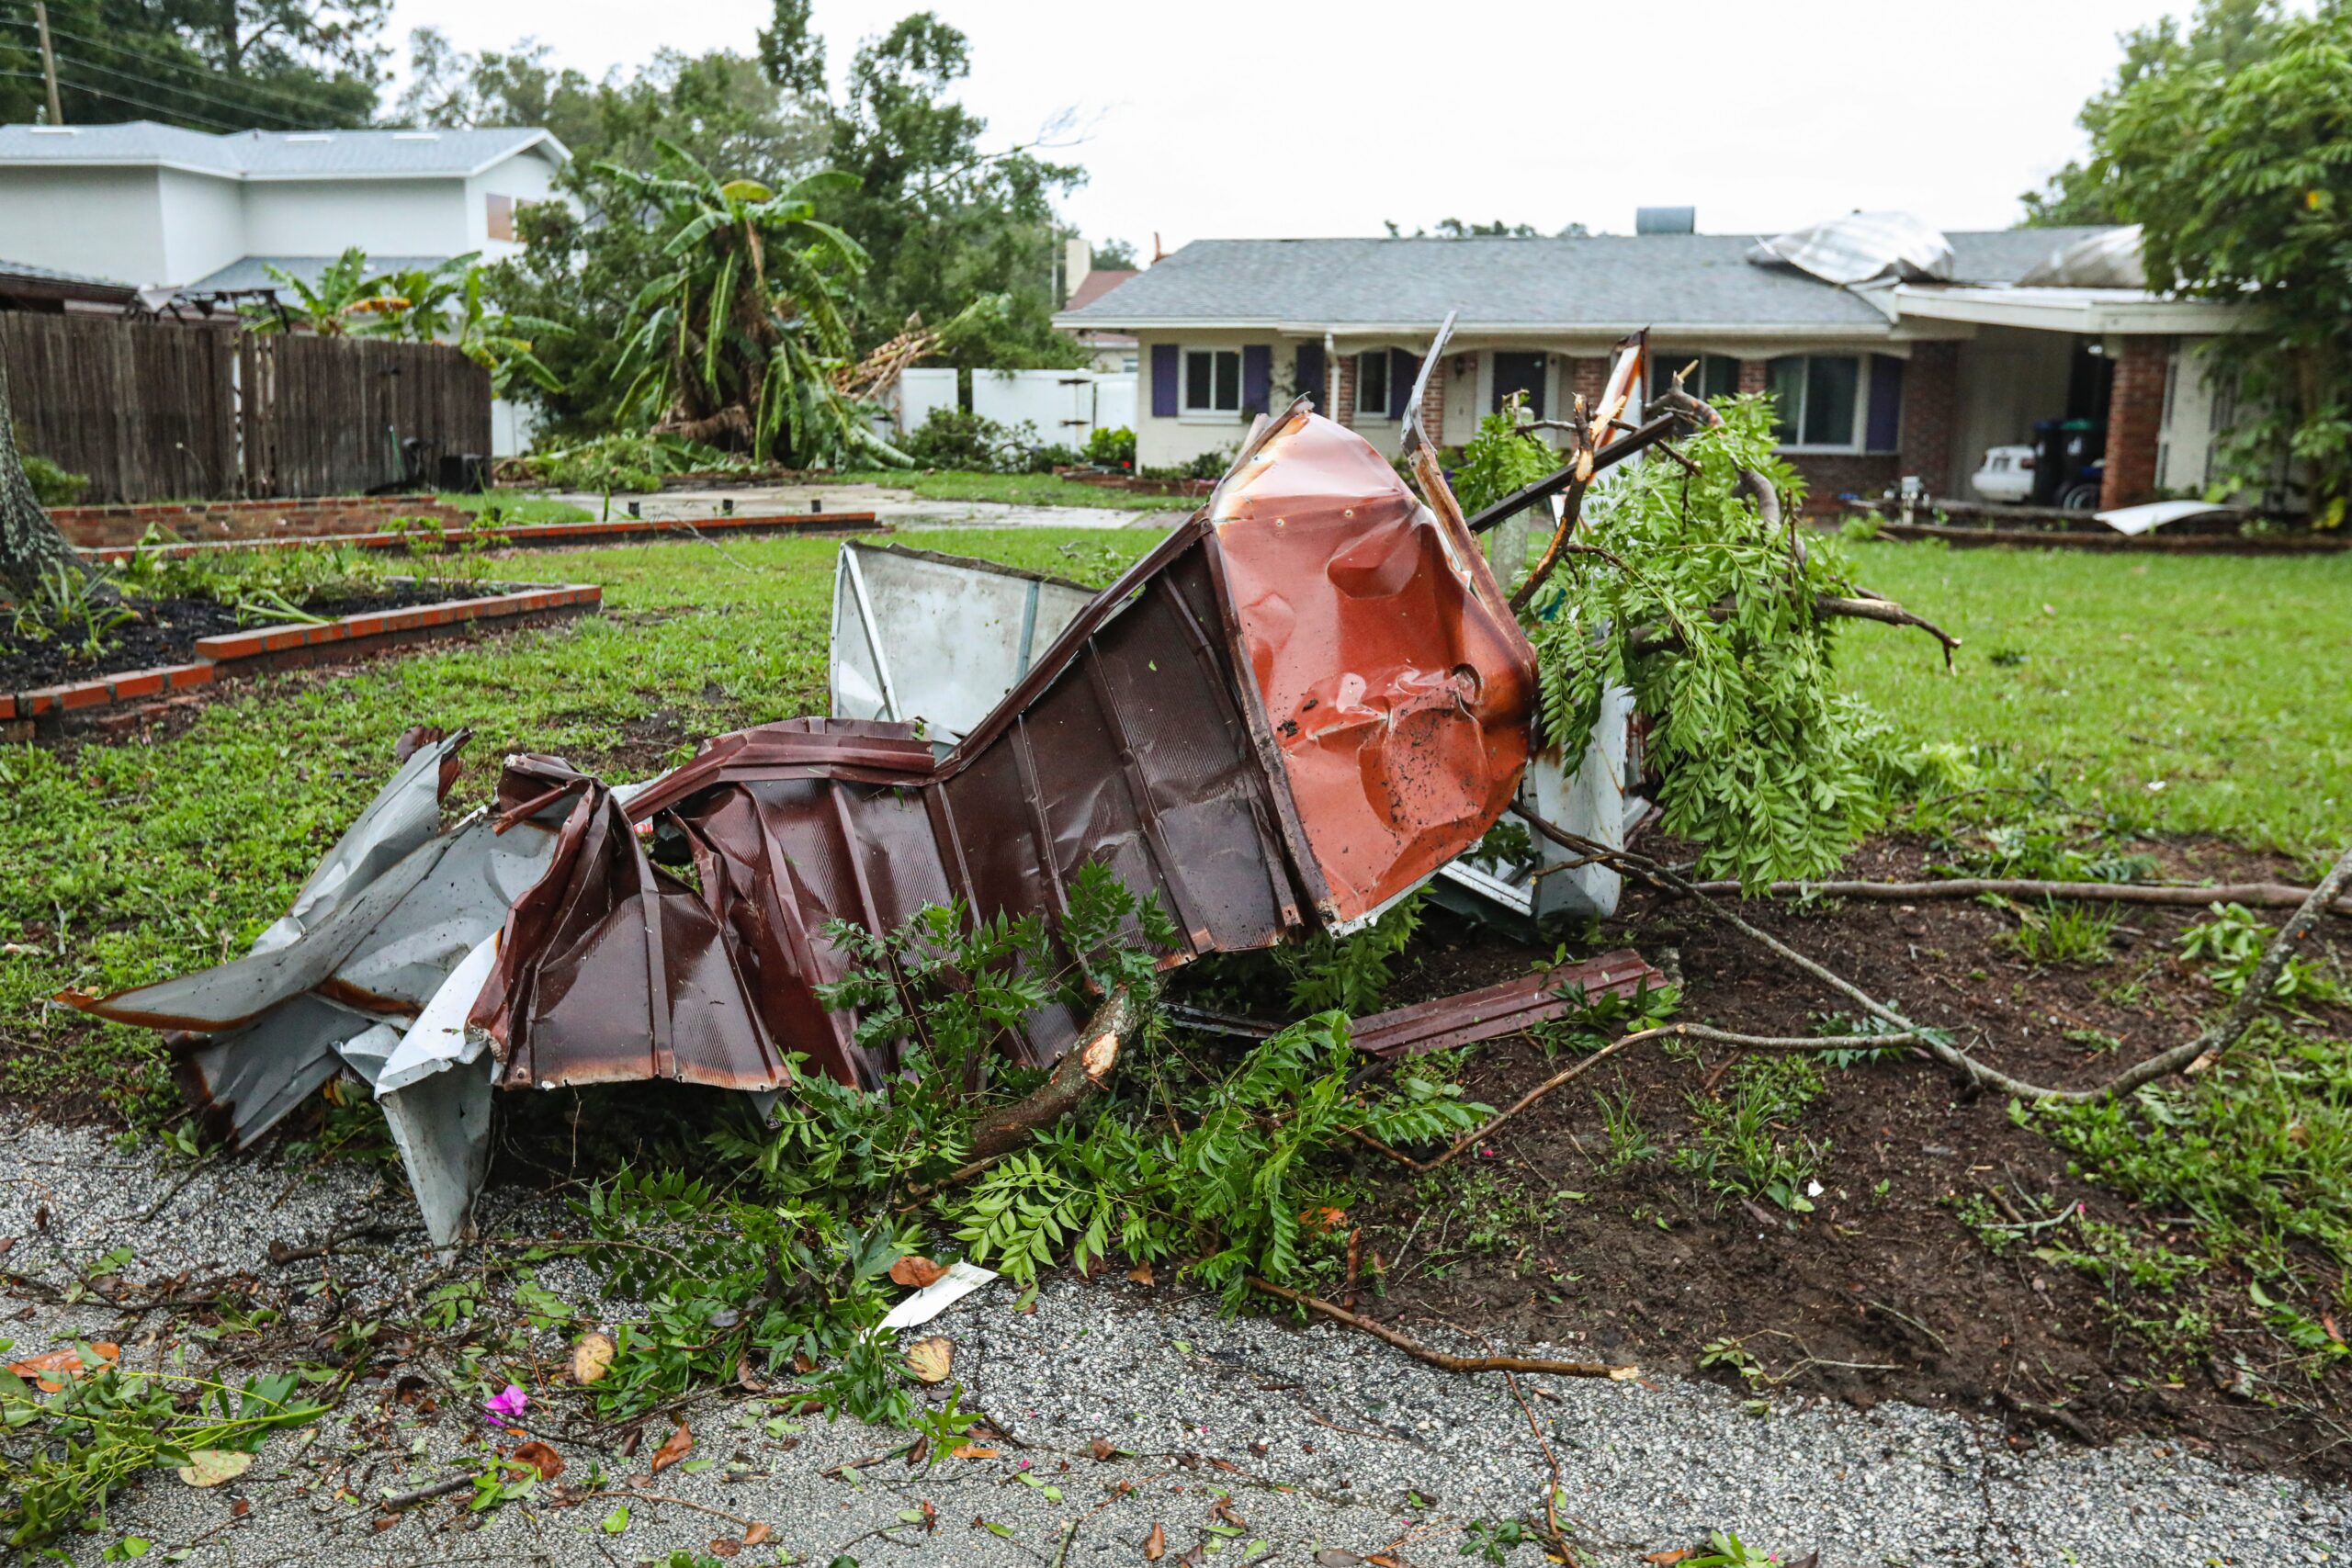 Read on to find the role of disaster restoration services after a storm!